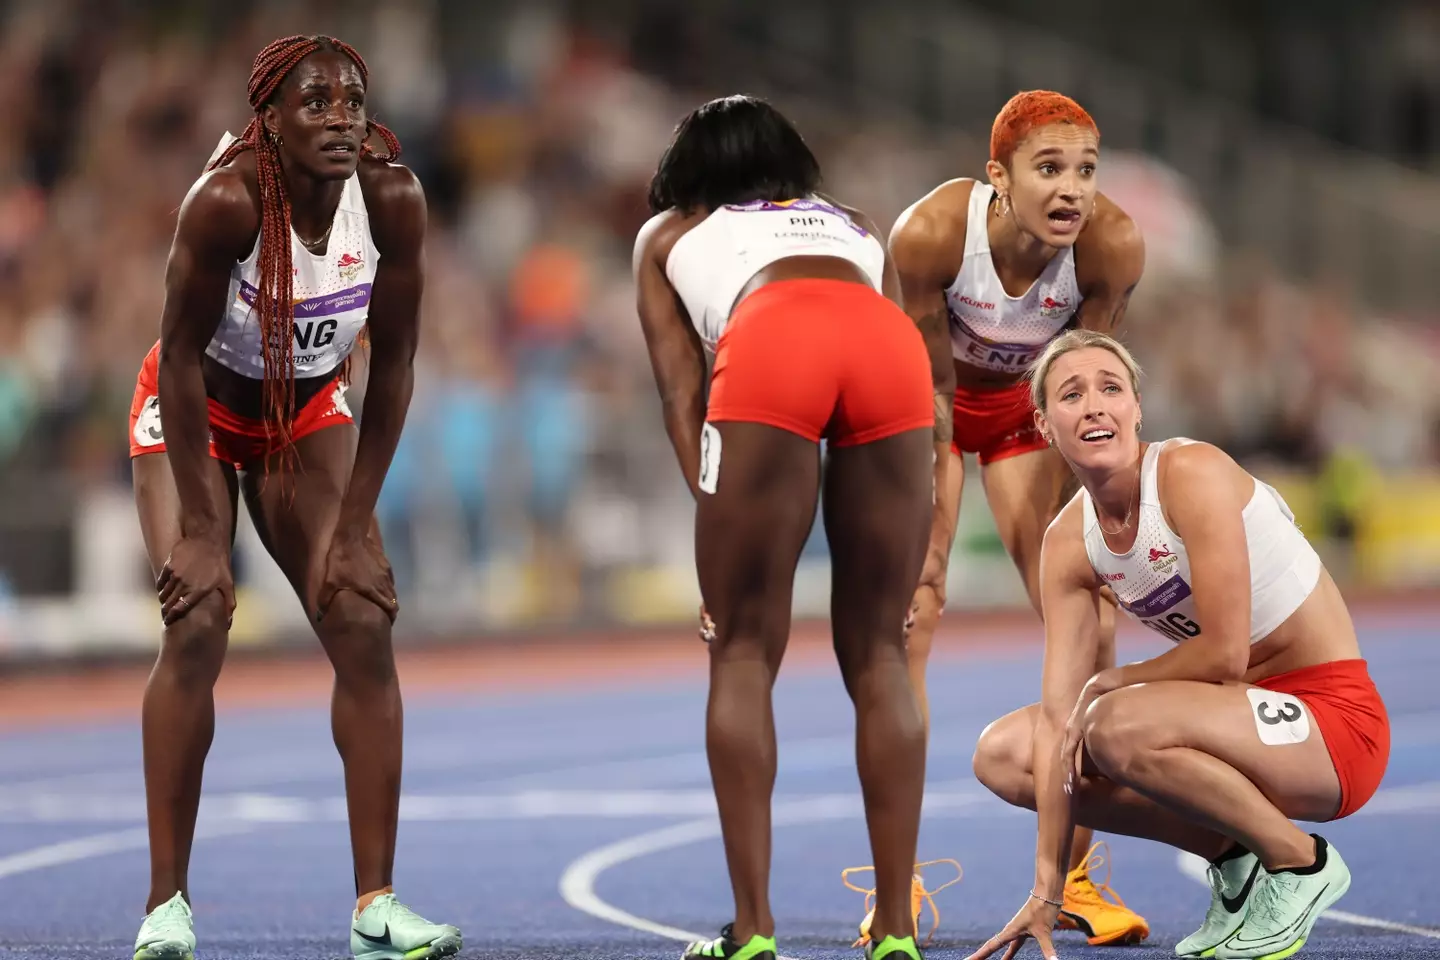 England were stripped of a gold medal in the Commonwealth Games this weekend.